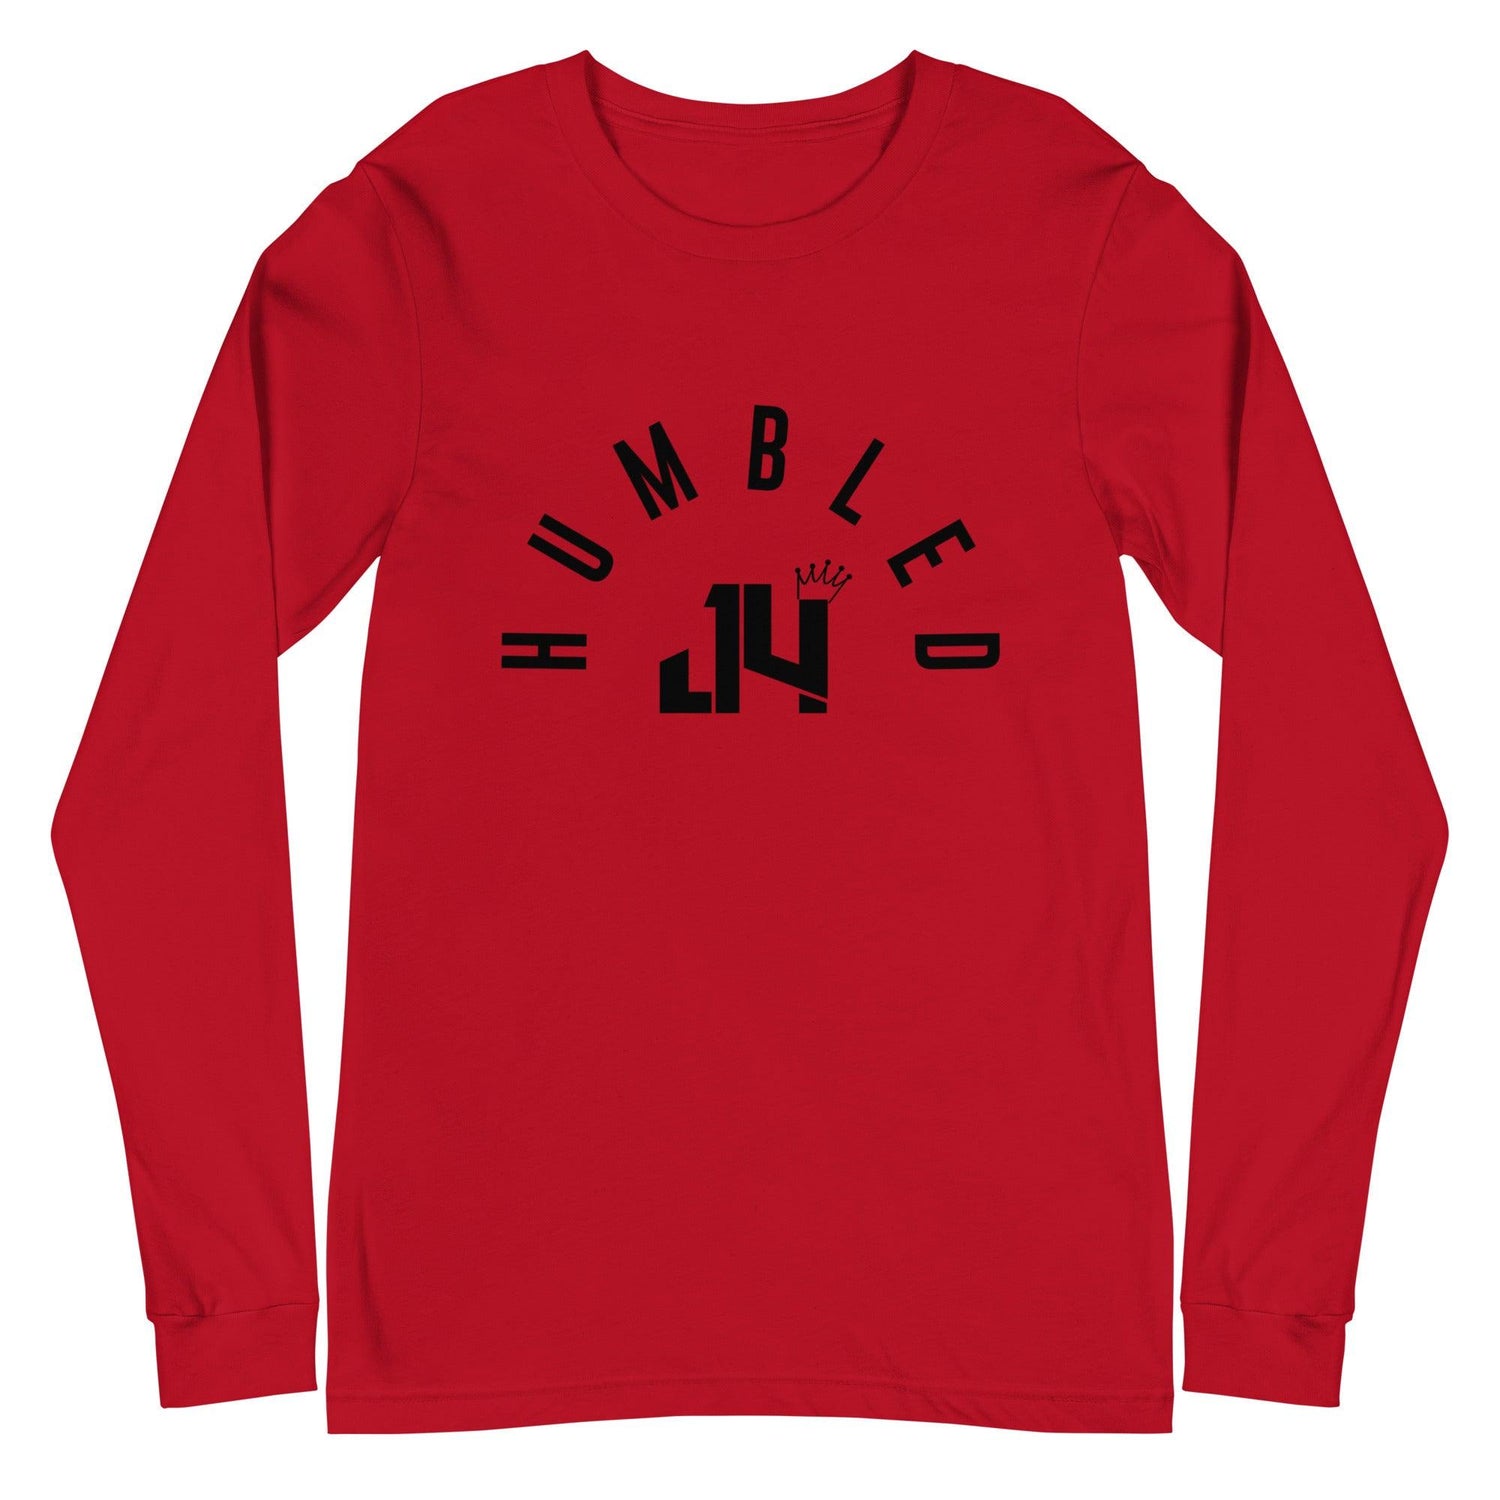 Jeff Foreman “Humbled” Long Sleeve Tee - Fan Arch